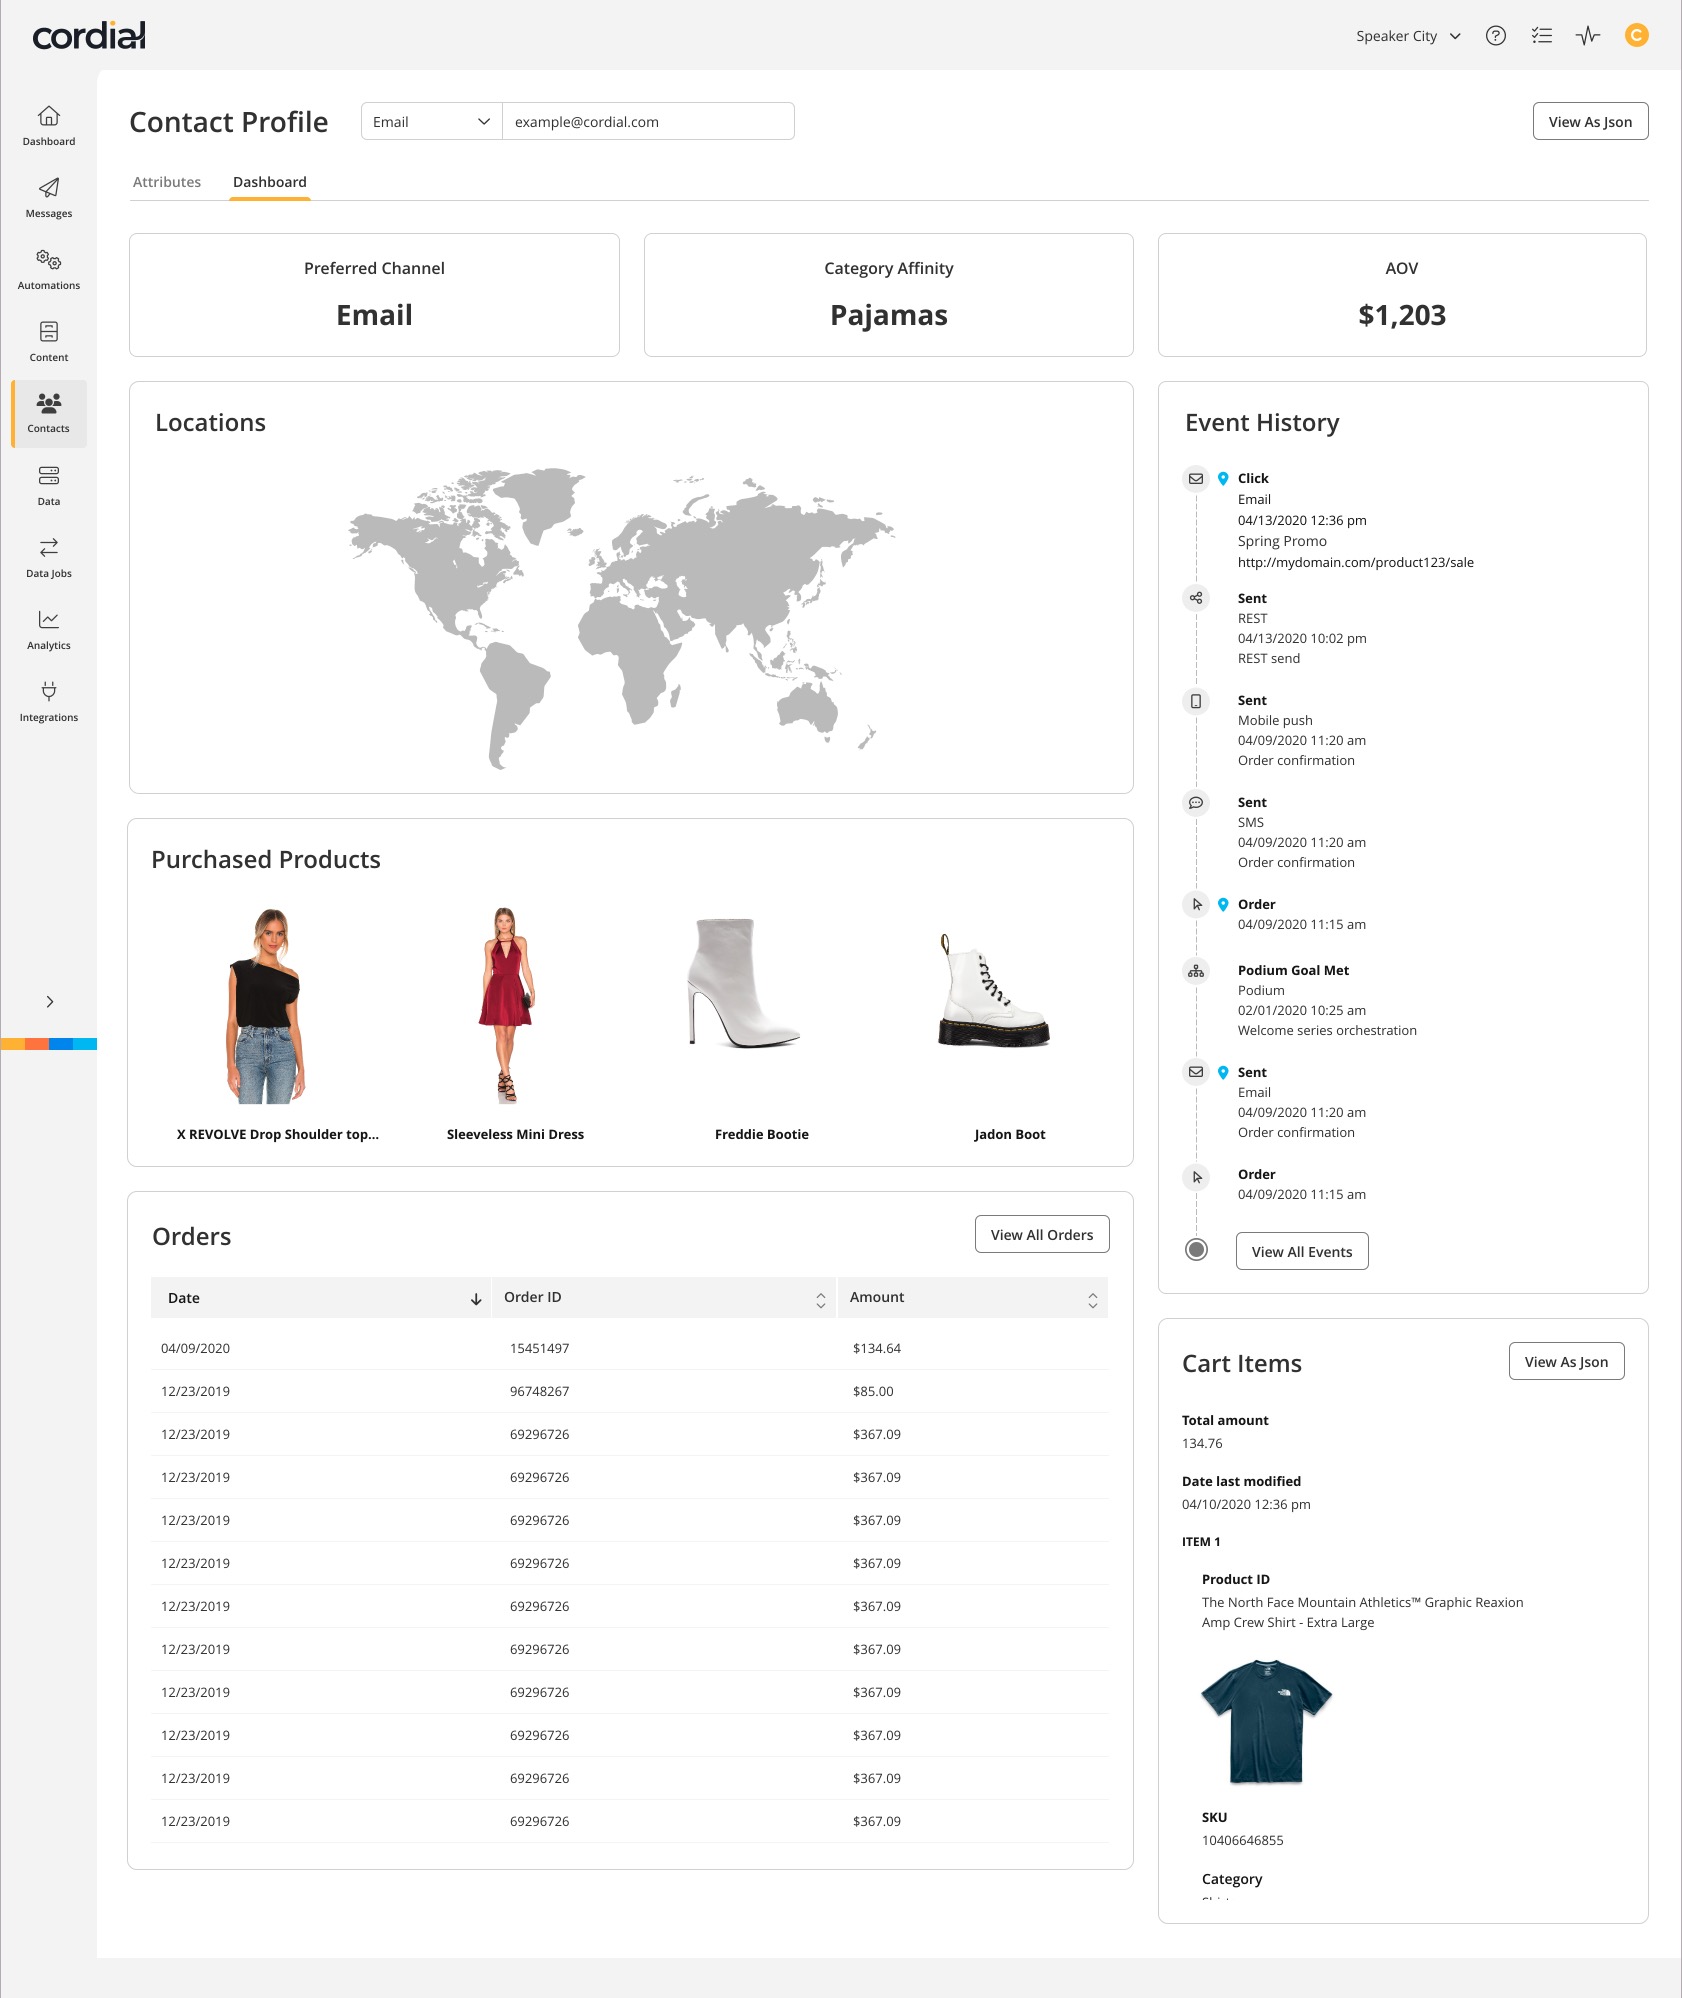 Cordial’s real-time customer data platform collects contact, event, behavior, product, and purchase data from all of your systems: POS systems, mobile apps, beacons, websites, product inventory, CRMs, and more!